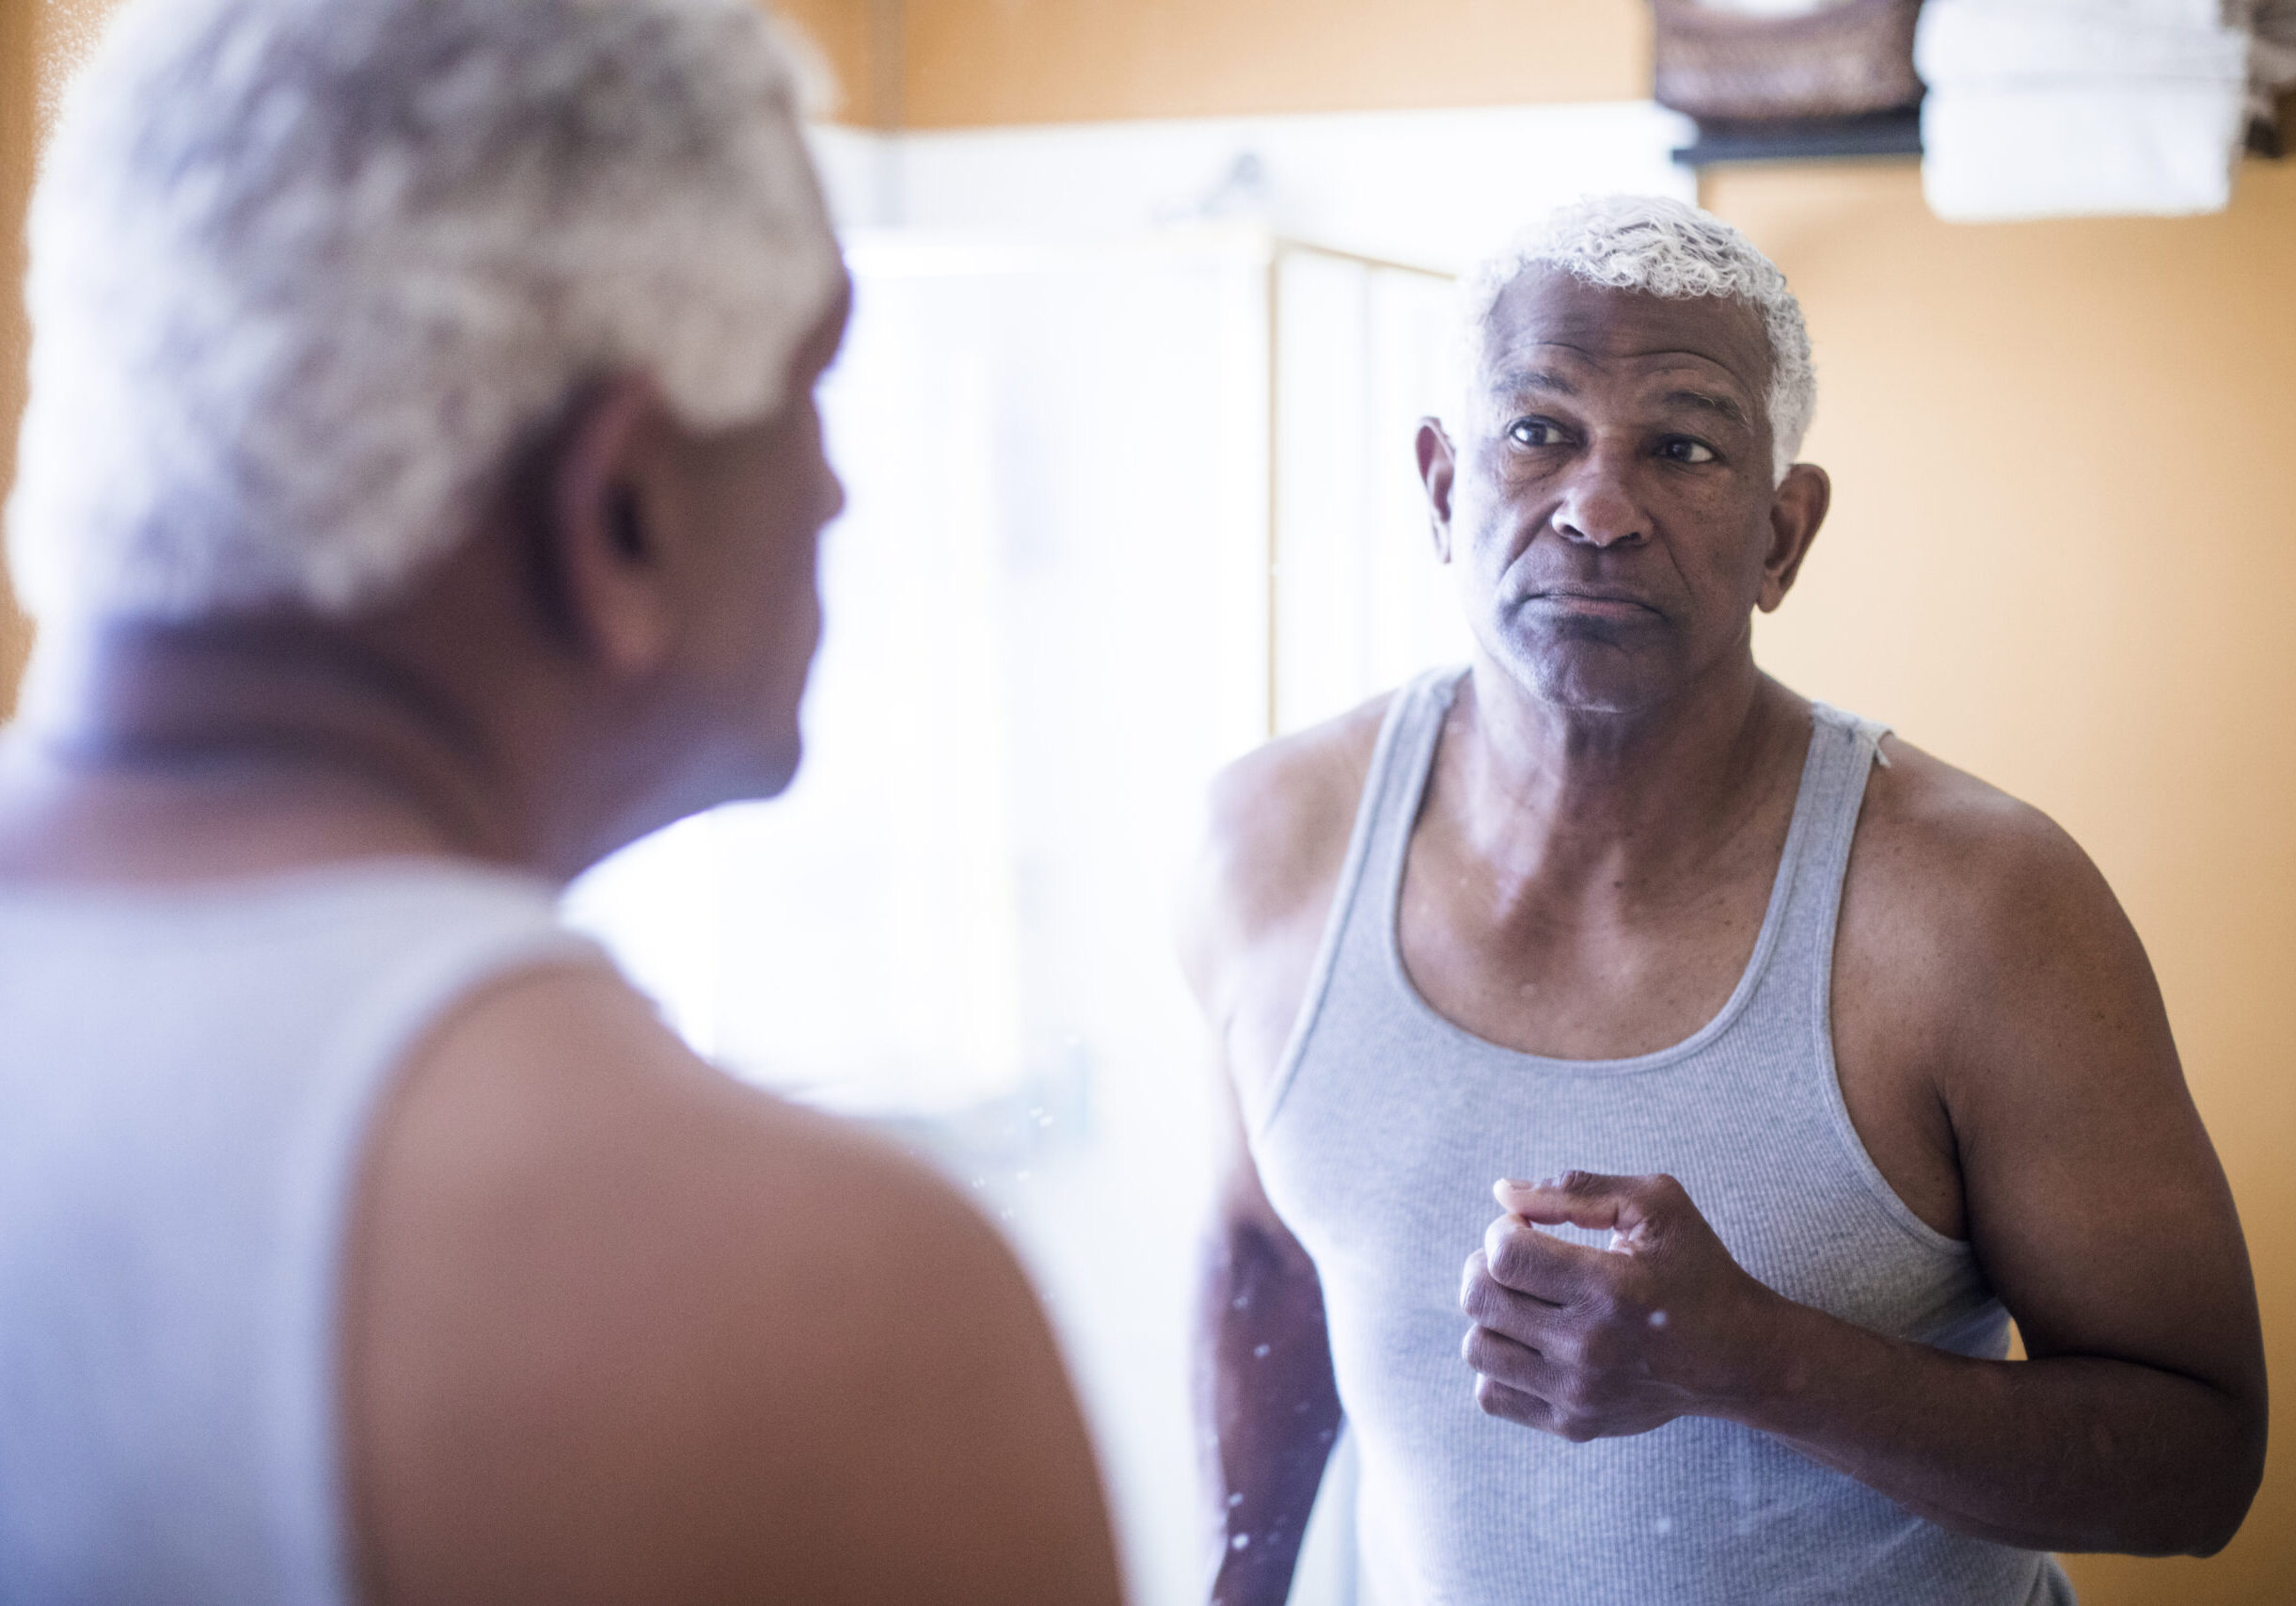 A senior black man looks at himself in the mirror in the bathroom